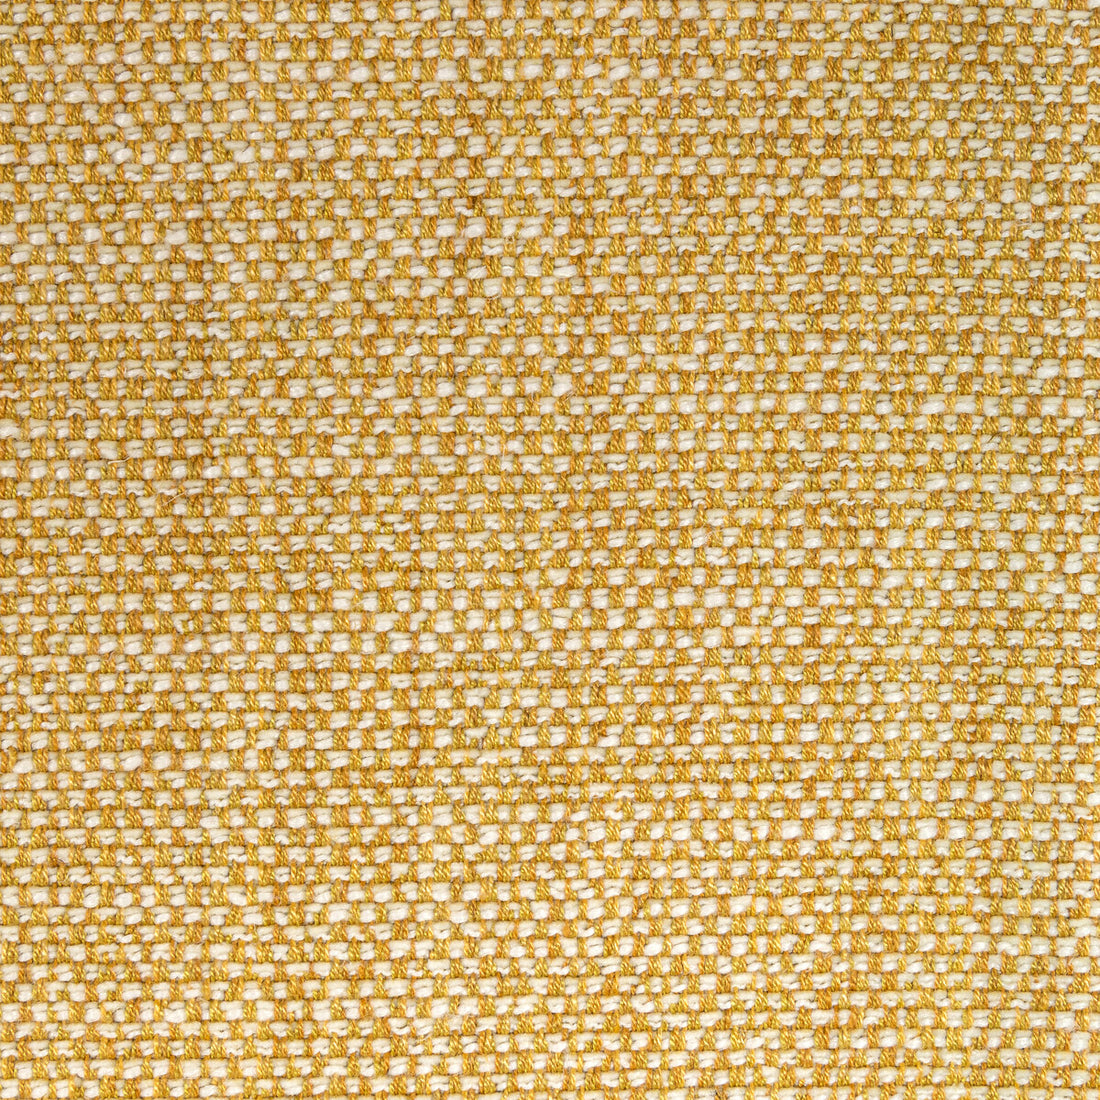 Edern Plain fabric in canary color - pattern 8022109.4.0 - by Brunschwig &amp; Fils in the Lorient Weaves collection